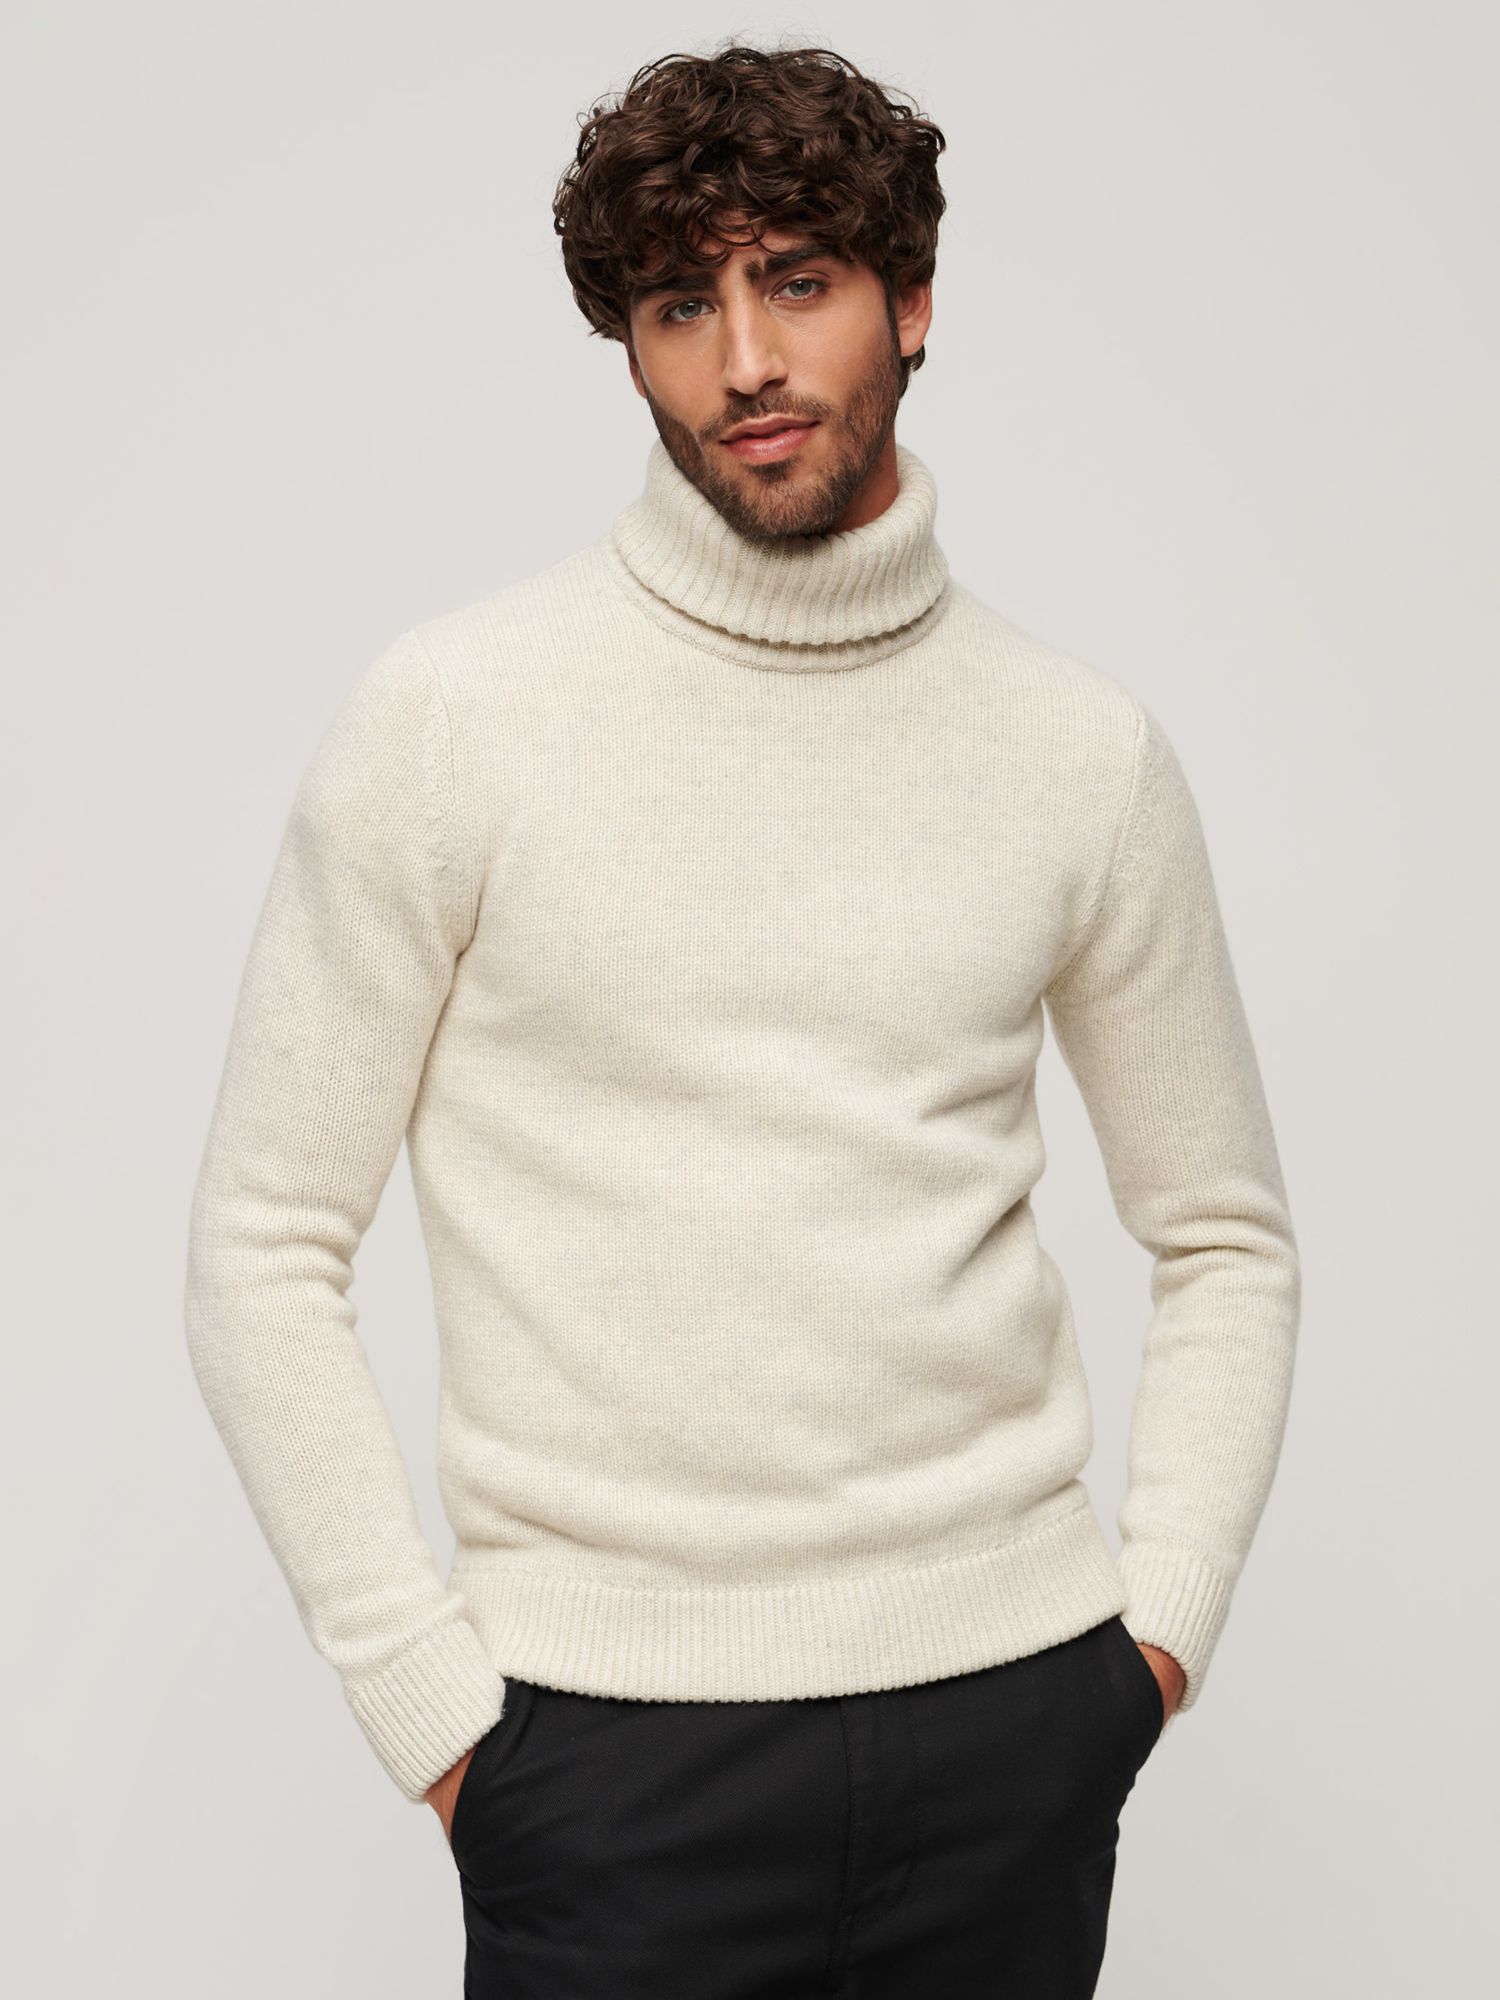 Superdry Roll Neck Jumper, Oatmeal at John Lewis & Partners